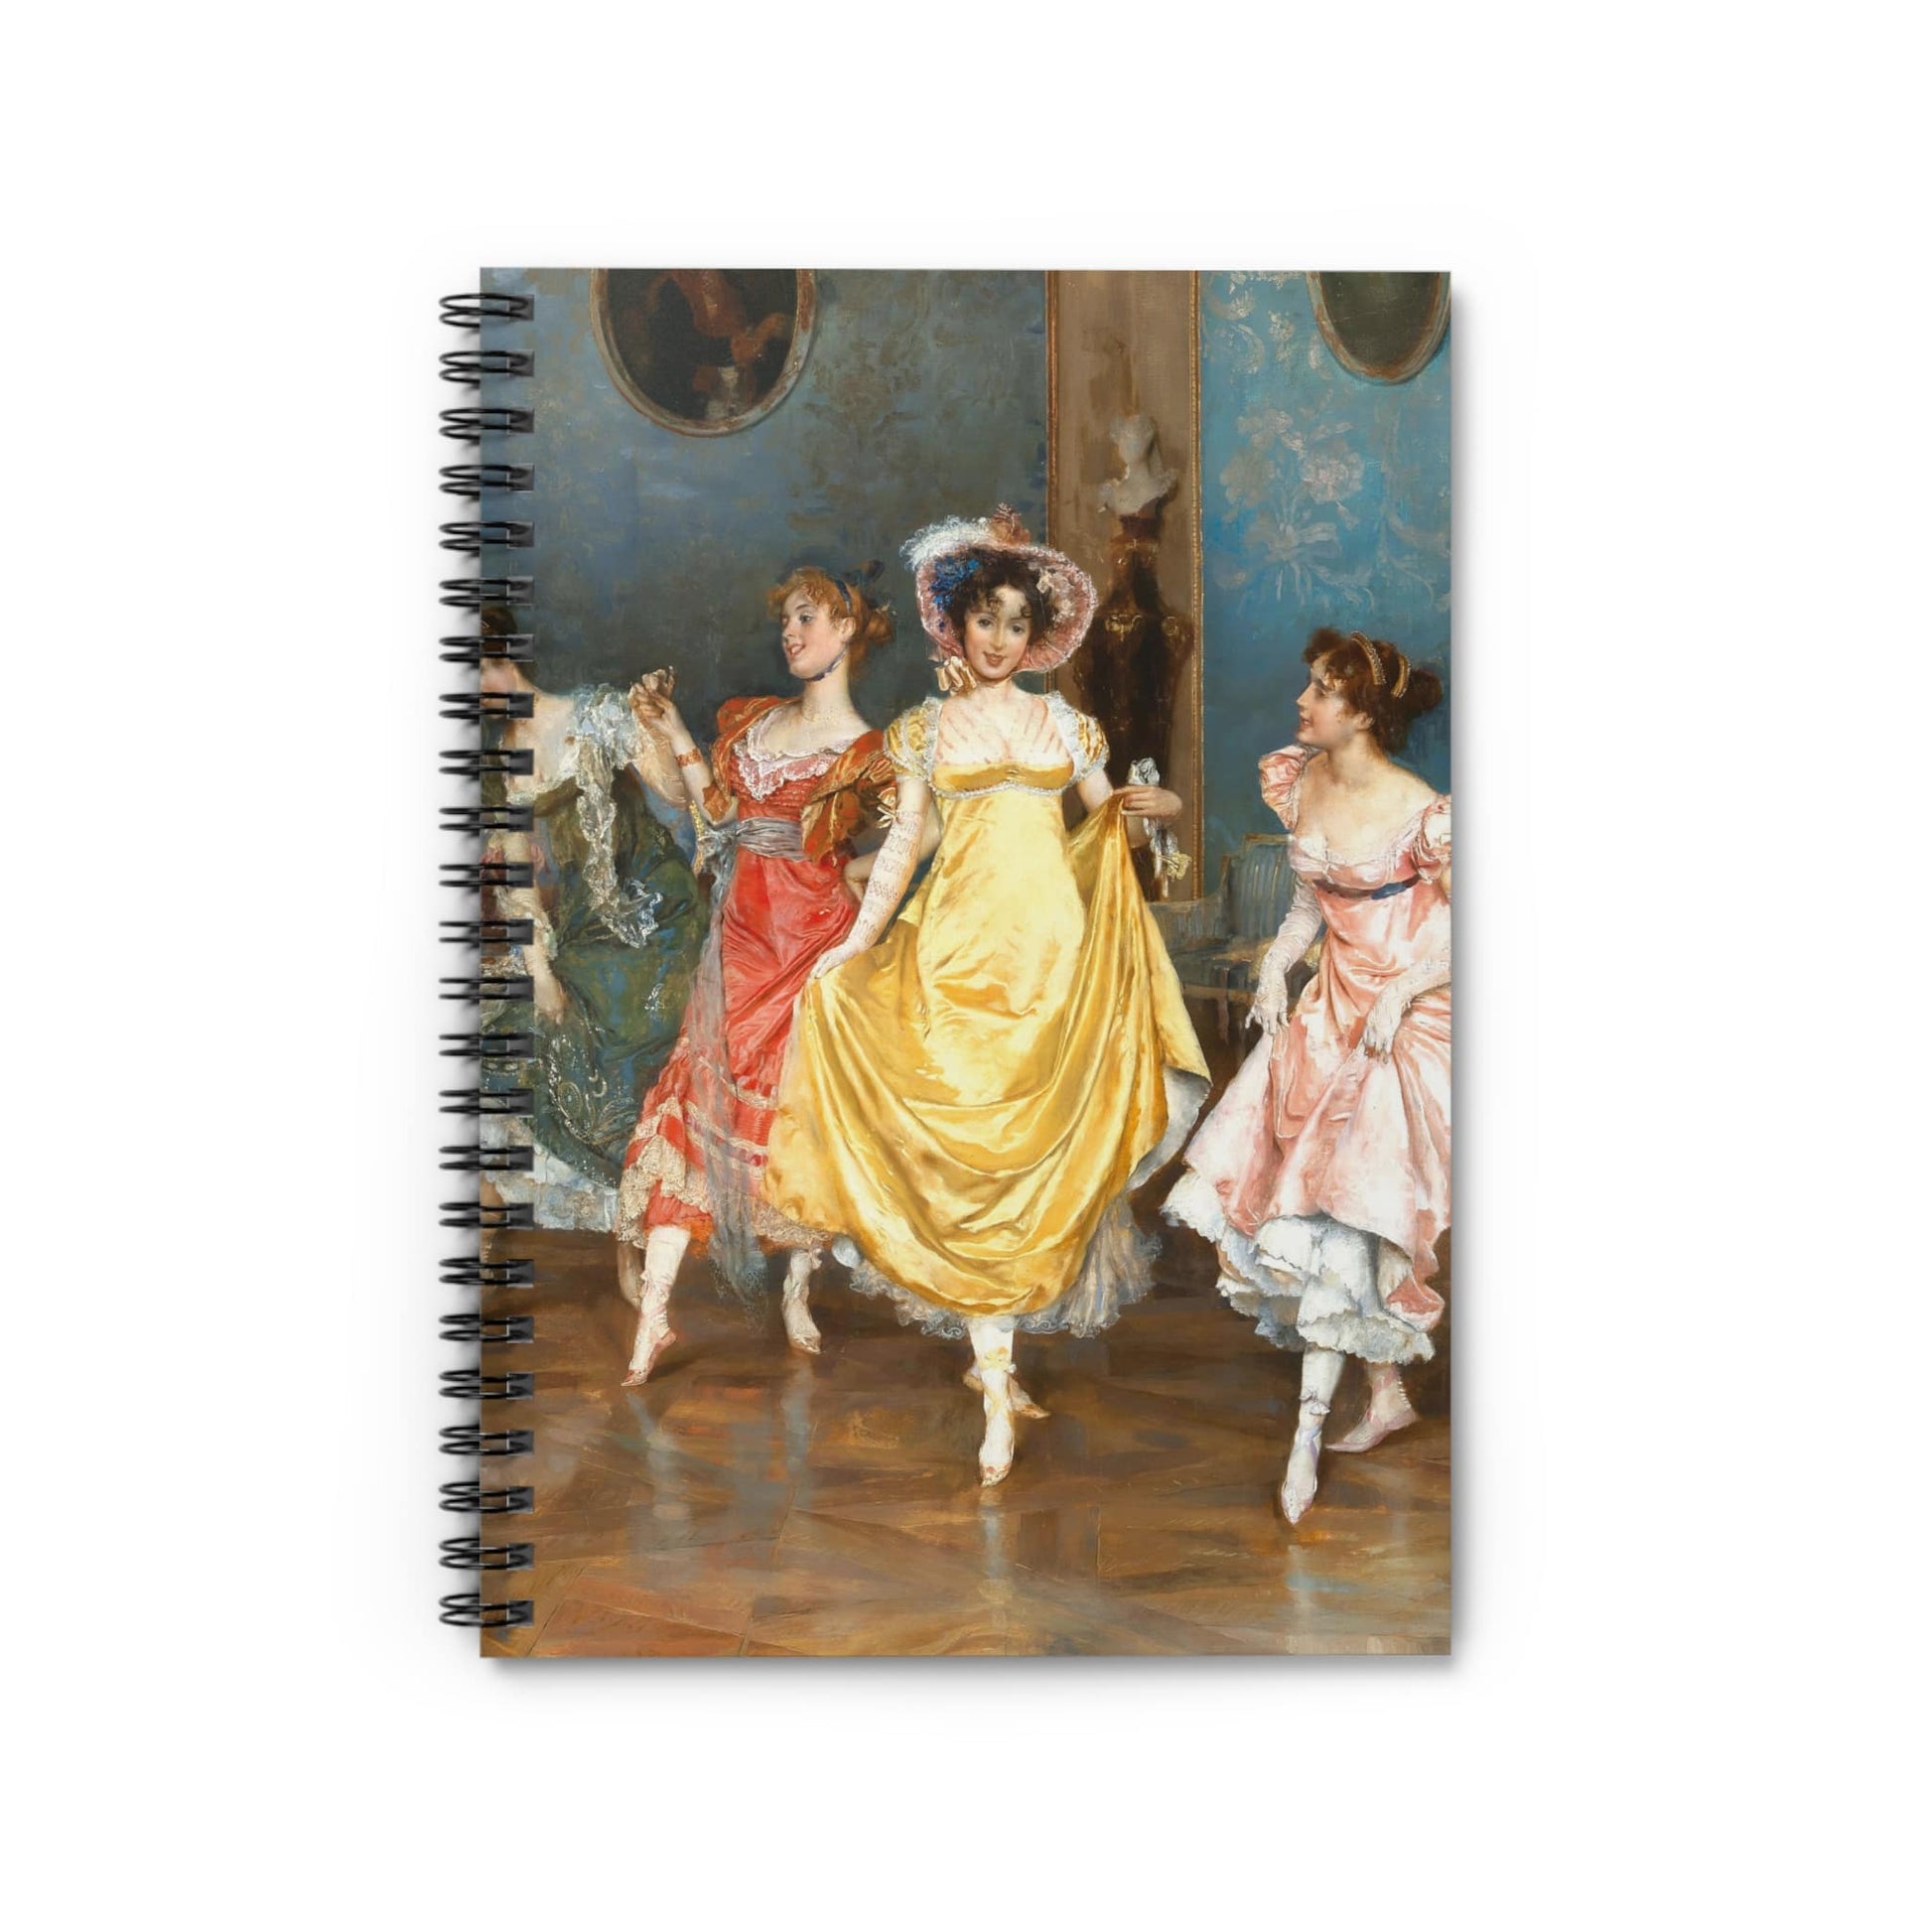 Victorian Girls Dancing Notebook with period dresses cover, ideal for journals and planners, featuring Victorian girls in period dresses.